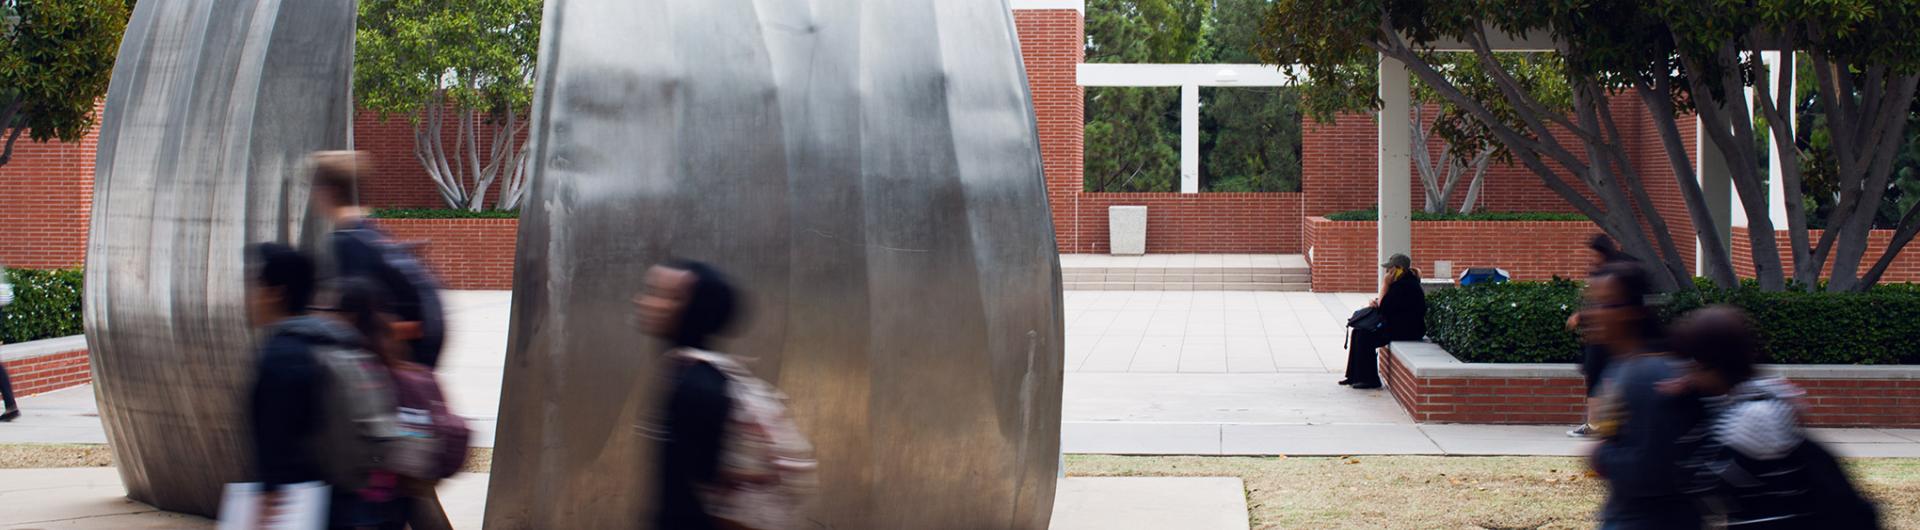 Students walk past a well-known campus Sculpture